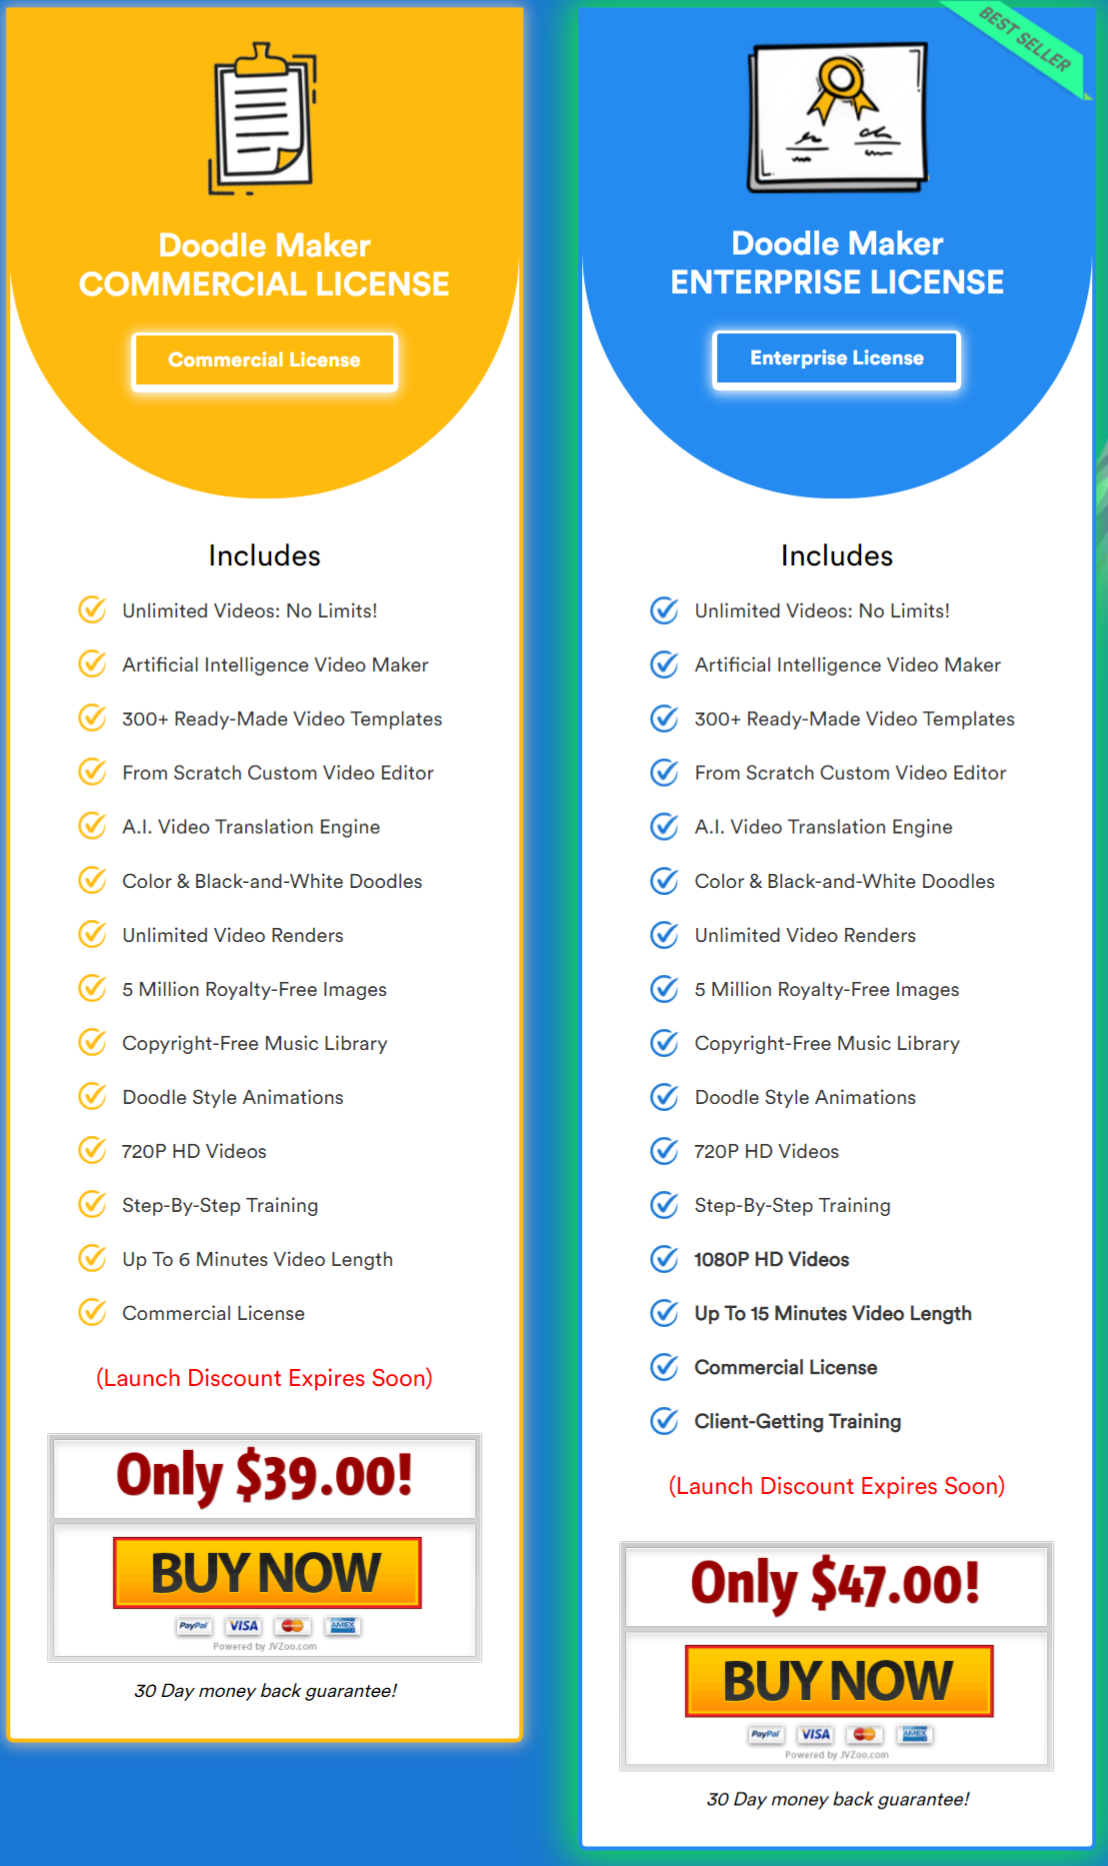 DoodleMaker price and funnel